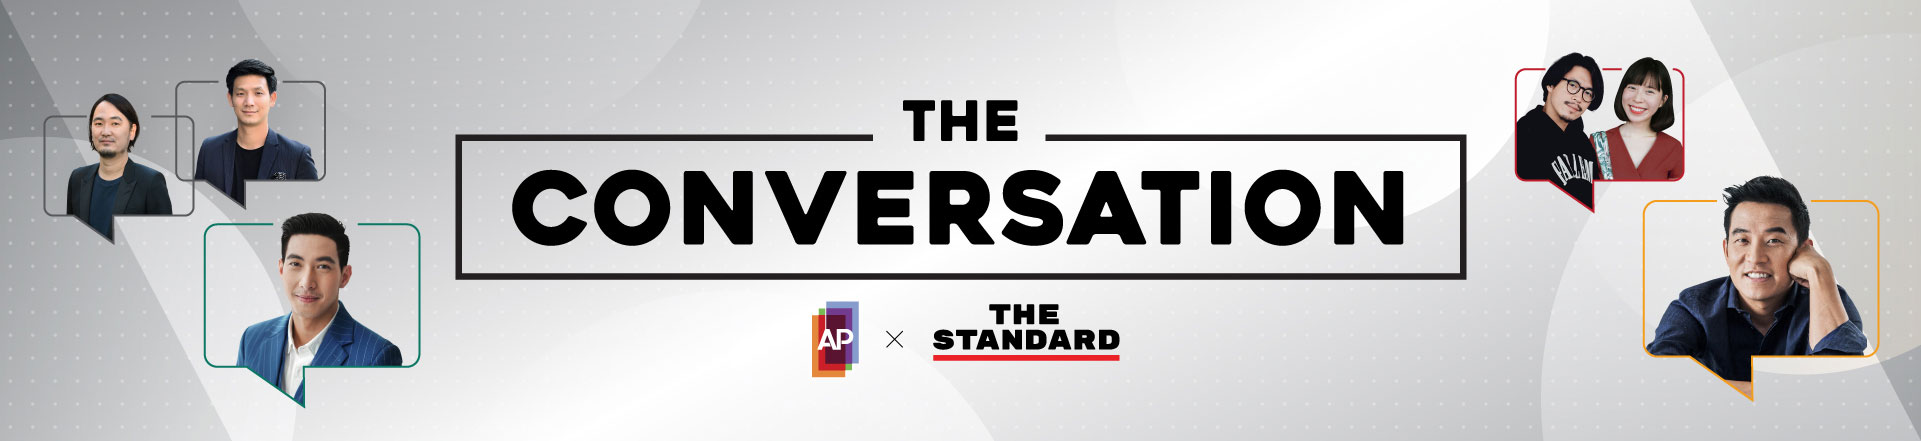 The Conversation by AP x THE STANDARD